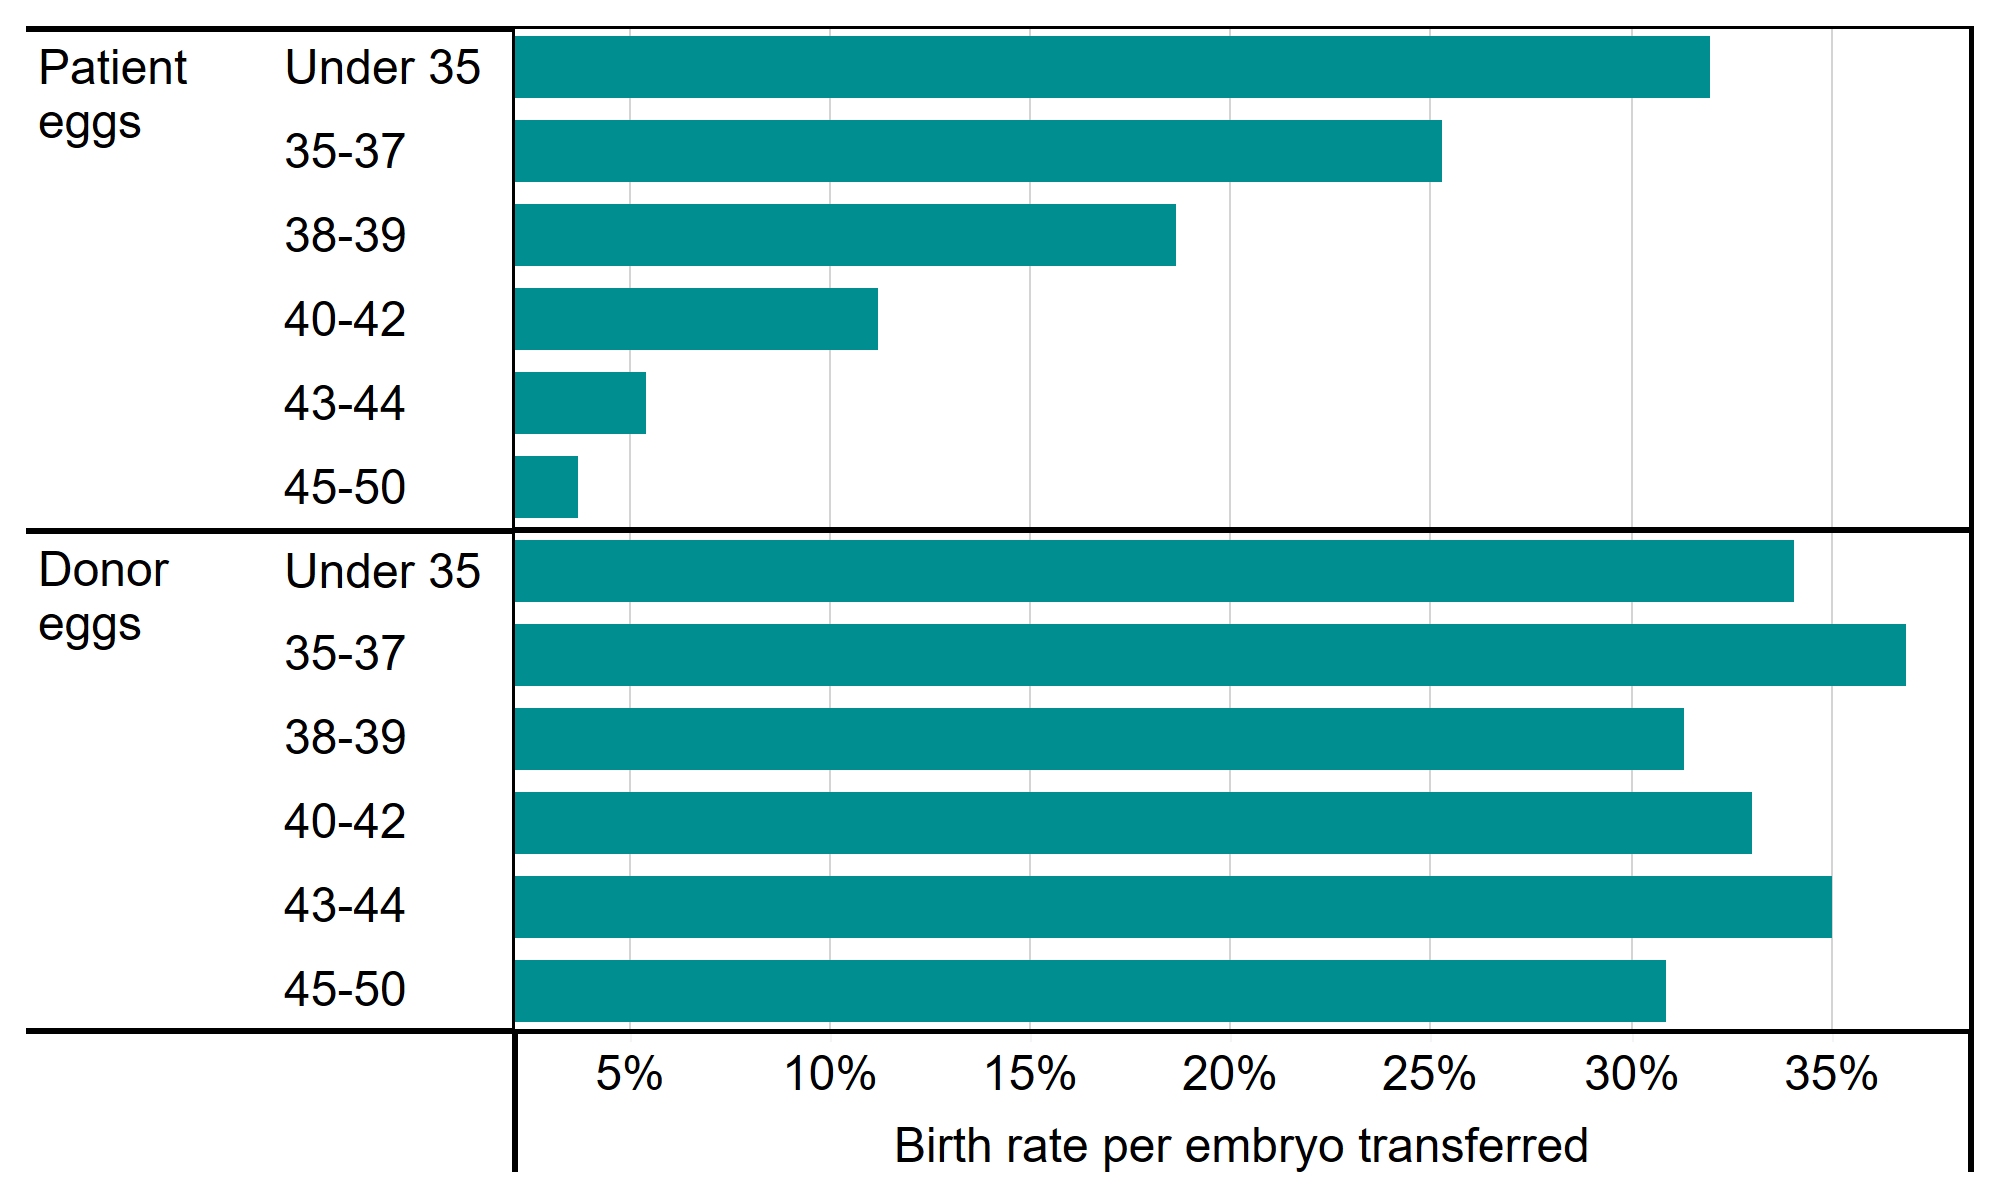 This bar chart shows the birth rate per embryo transferred for banded age groups; under 35, 35-37, 38-39, 40-42, 43-44 and 45-50, using both patient and donor eggs. [3. Summary] For patient eggs, the birth rate per embryo transferred decreased as the patient age increased. For patients under 35 years of age using own eggs in treatment, the birth rate per embryo transferred was 32%, in contrast patients 40-45 years of age had birth rates of 4% using own eggs. For patients using donor eggs, the birth rate per embryo transferred was similar across the age groups. For patients under 35 the birth rate per embryo transferred was 34% and for patients in the 45-50 age group it was 31%. An accessible form of the underlying data for this figure can be downloaded beneath the image in .xls format.